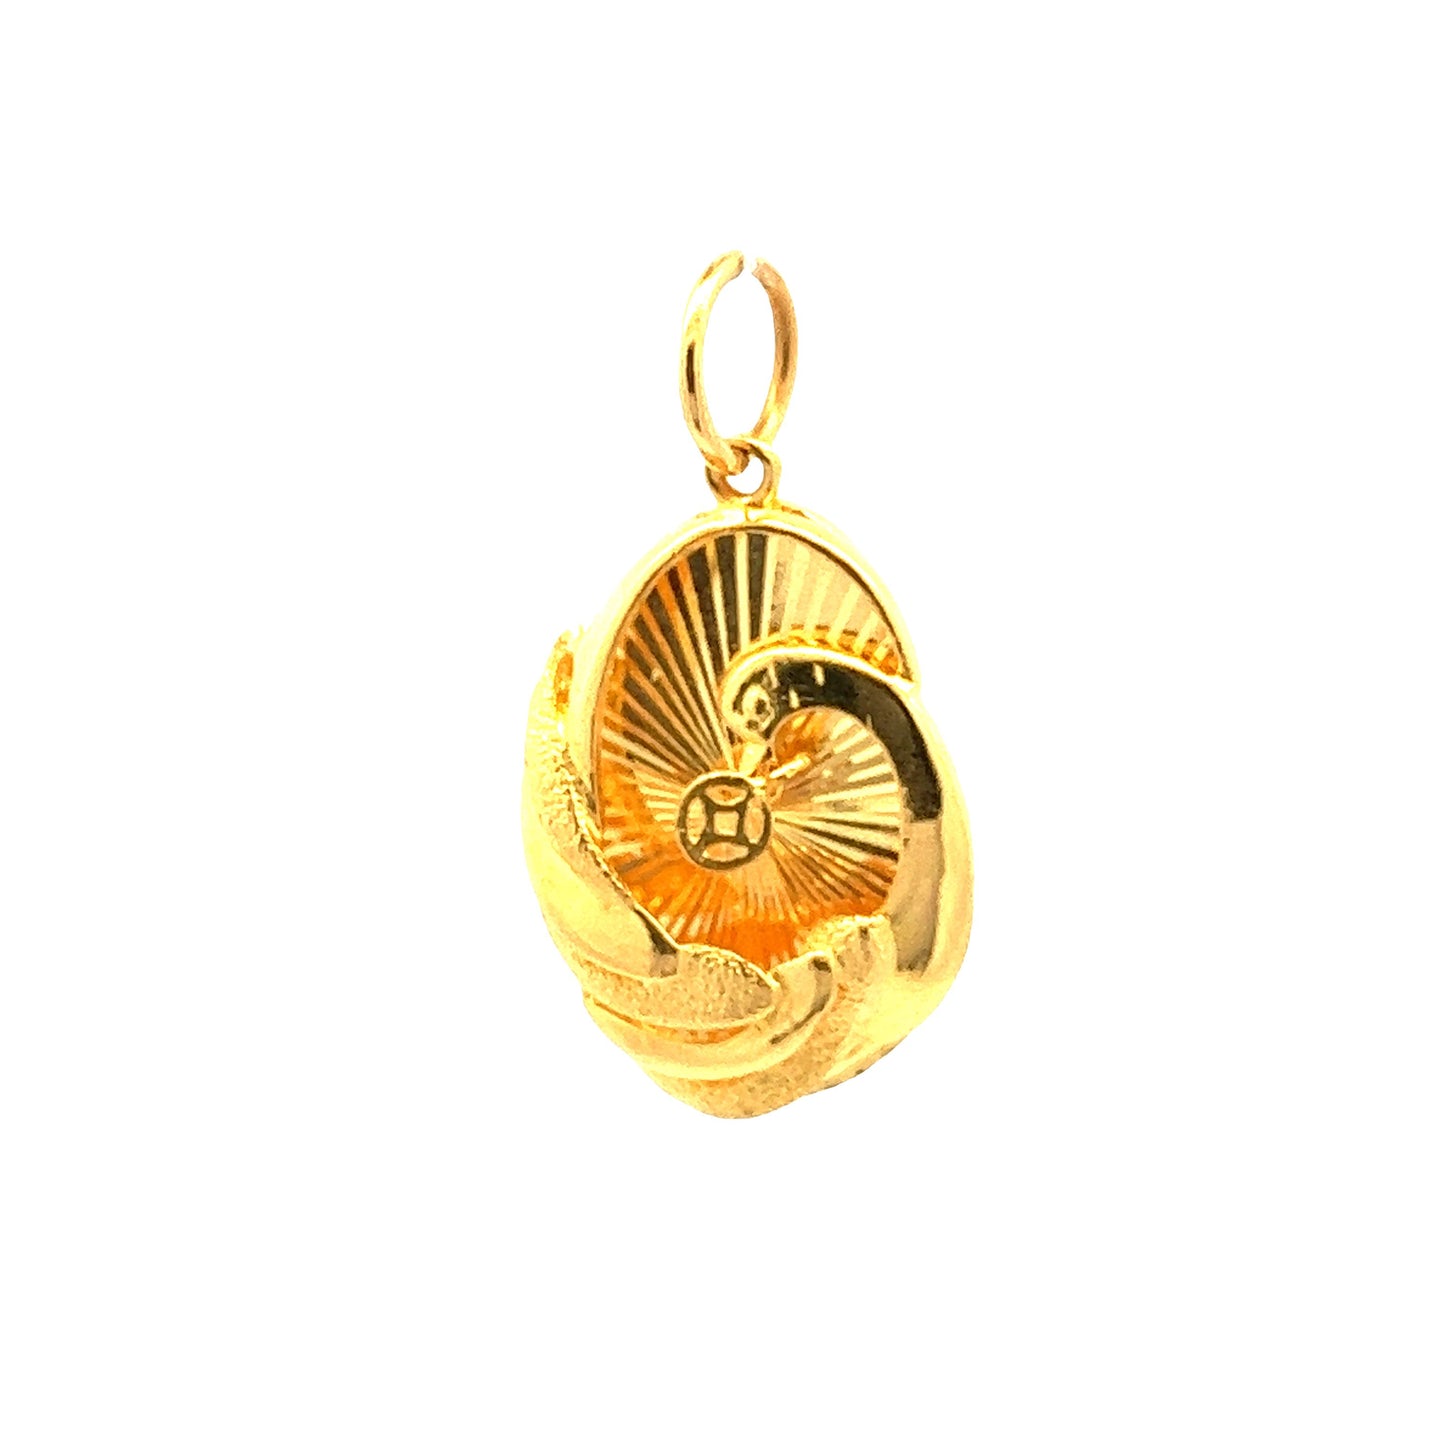 GOLD PENDANT ( 22K ) ( 4.91g ) - 0012905 Chain sold separately